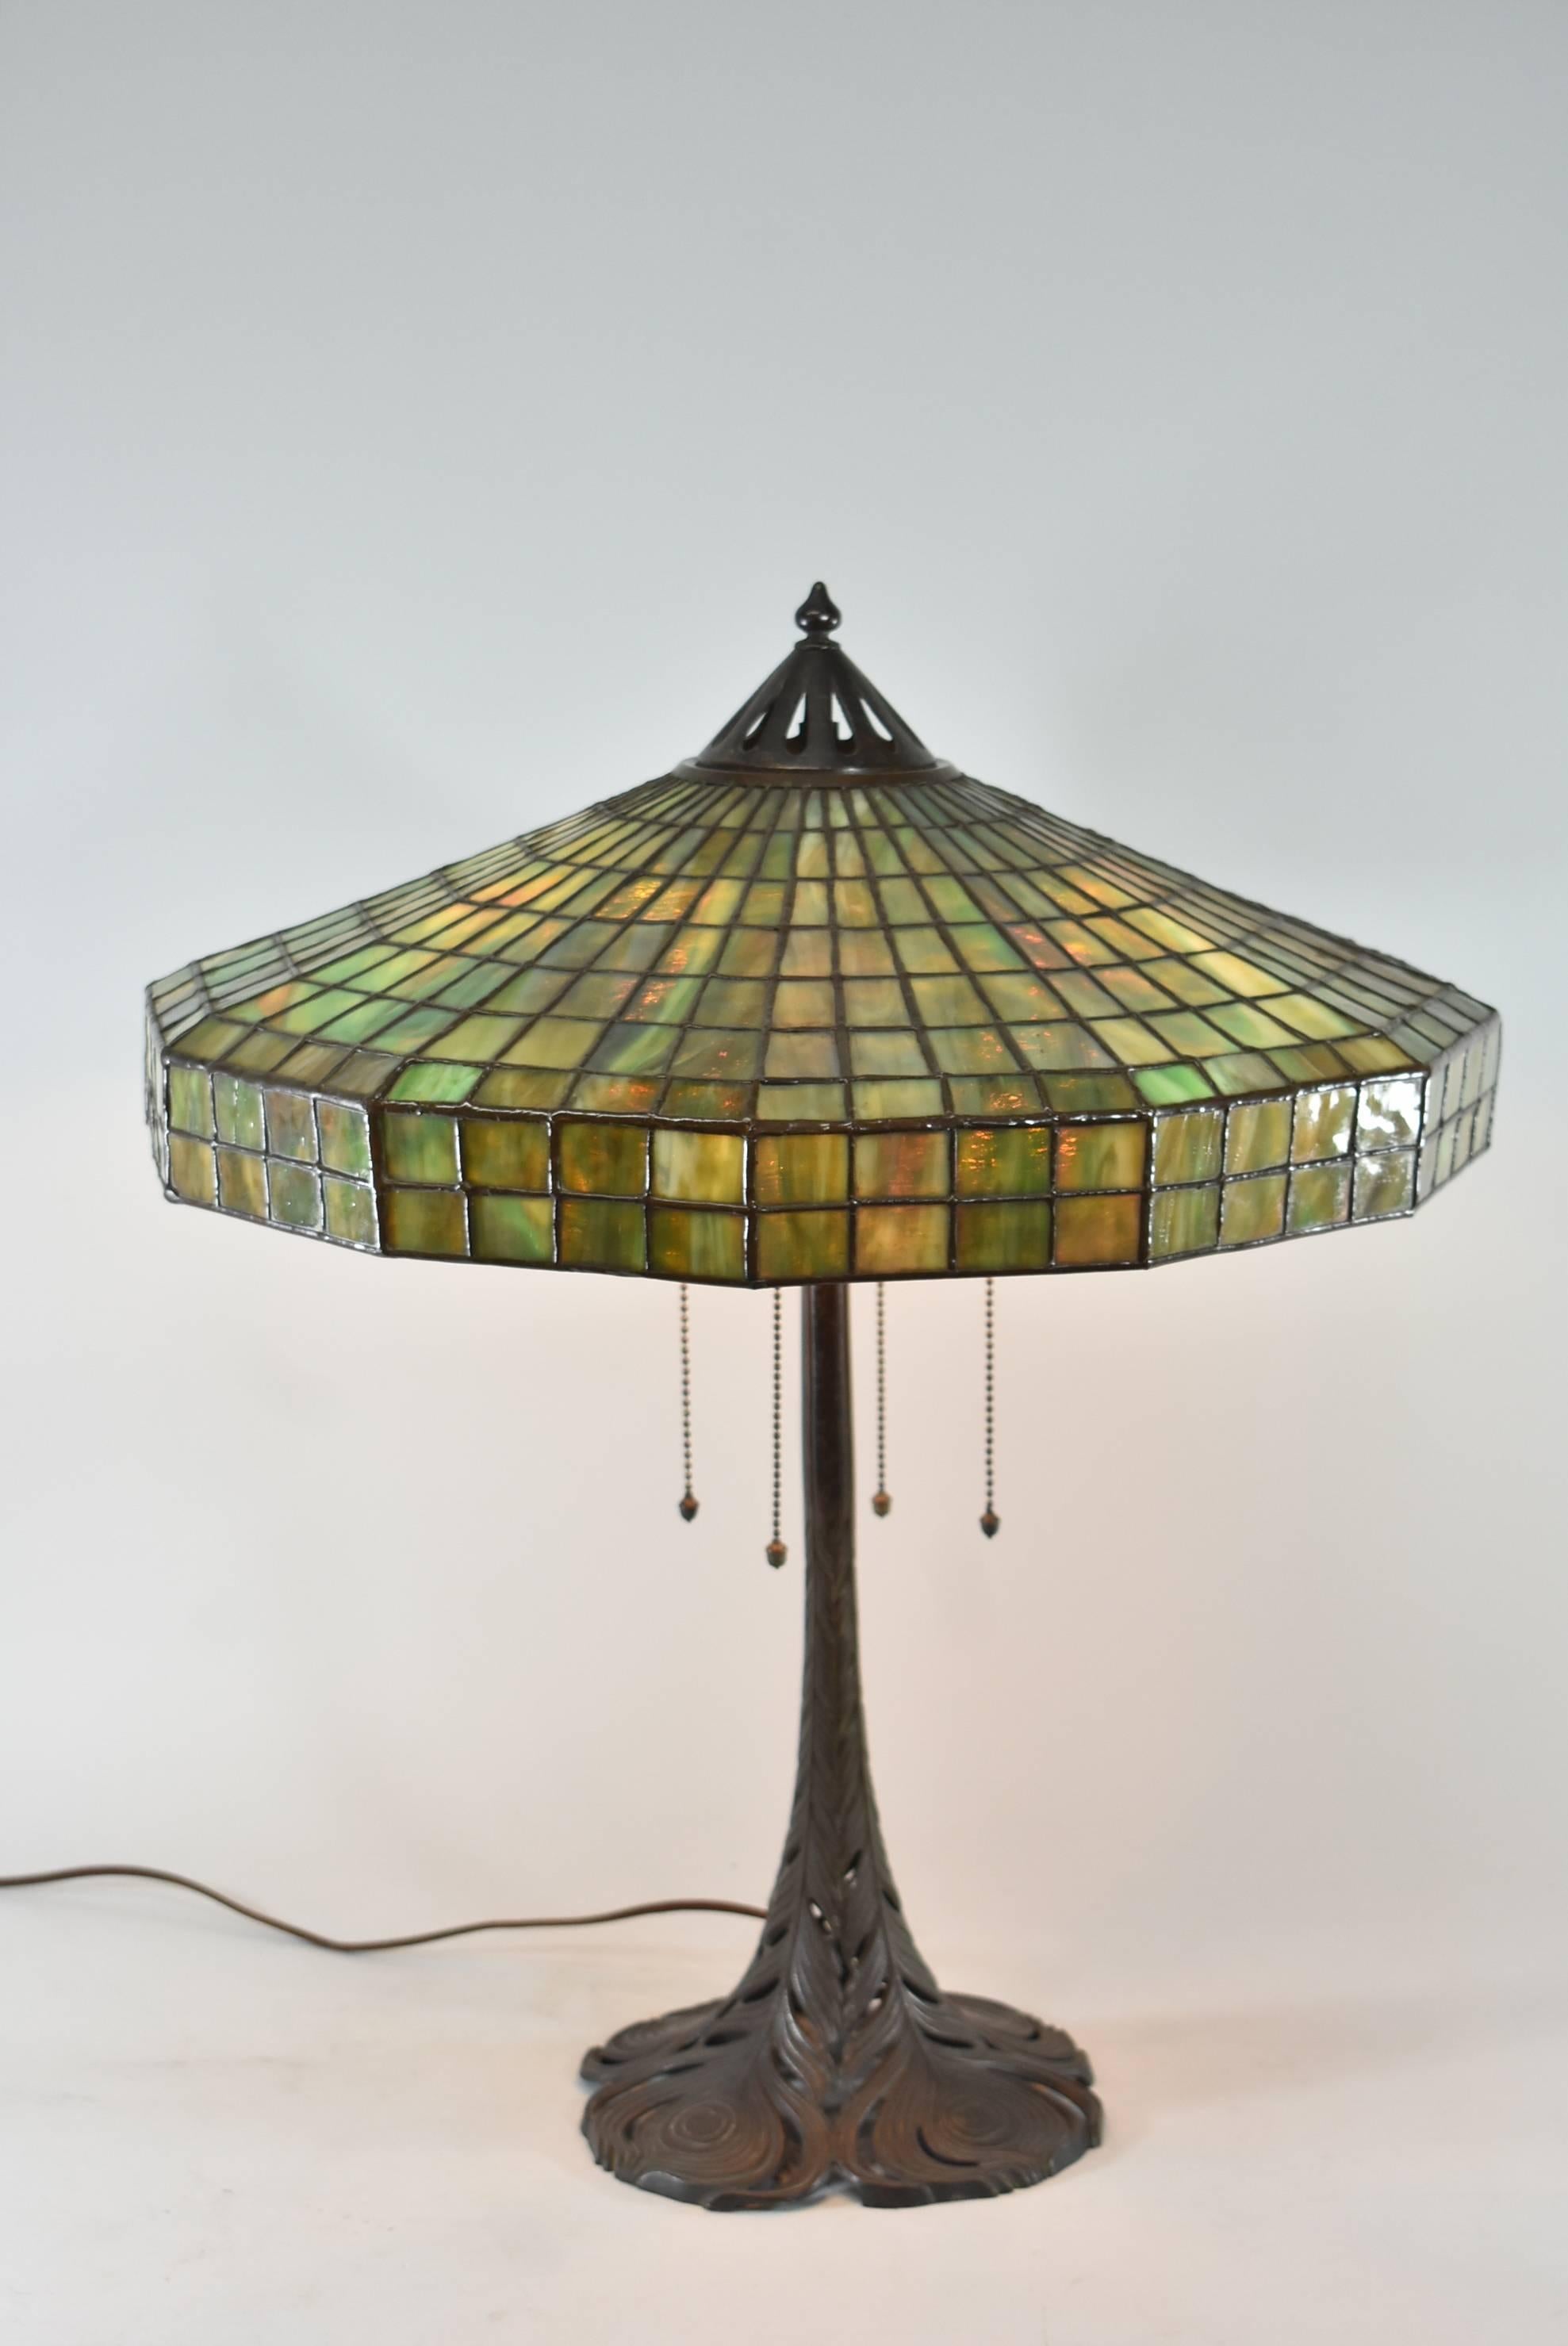 A stunning Handel leaded glass lamp. The 20